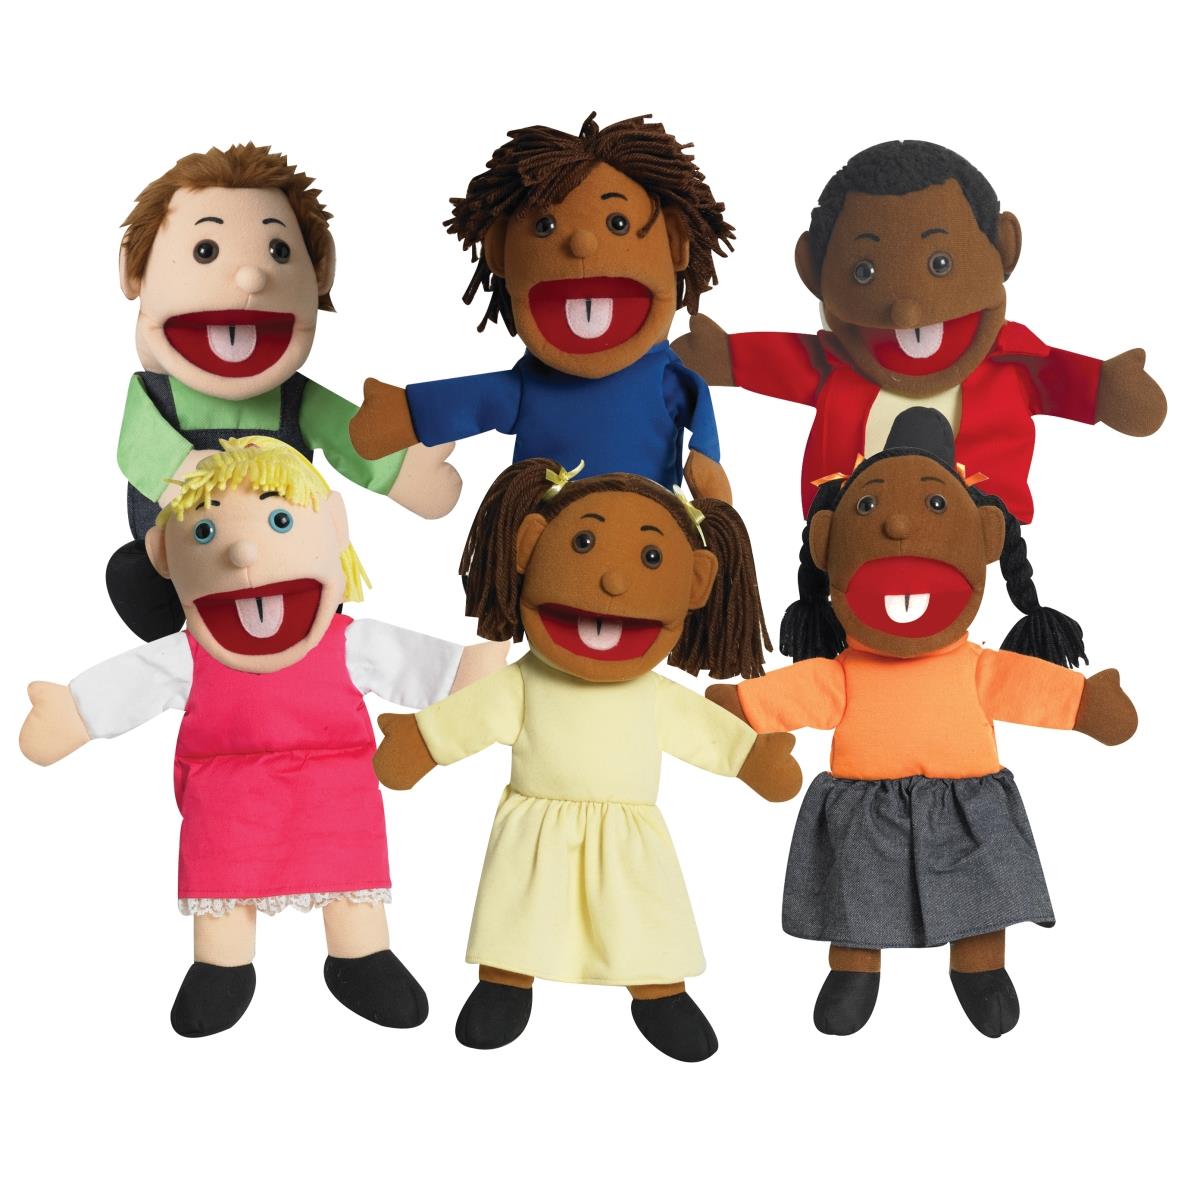 Cf100-896 15 In. Ethnic Children Puppets With Movable Mouths - Set Of 6